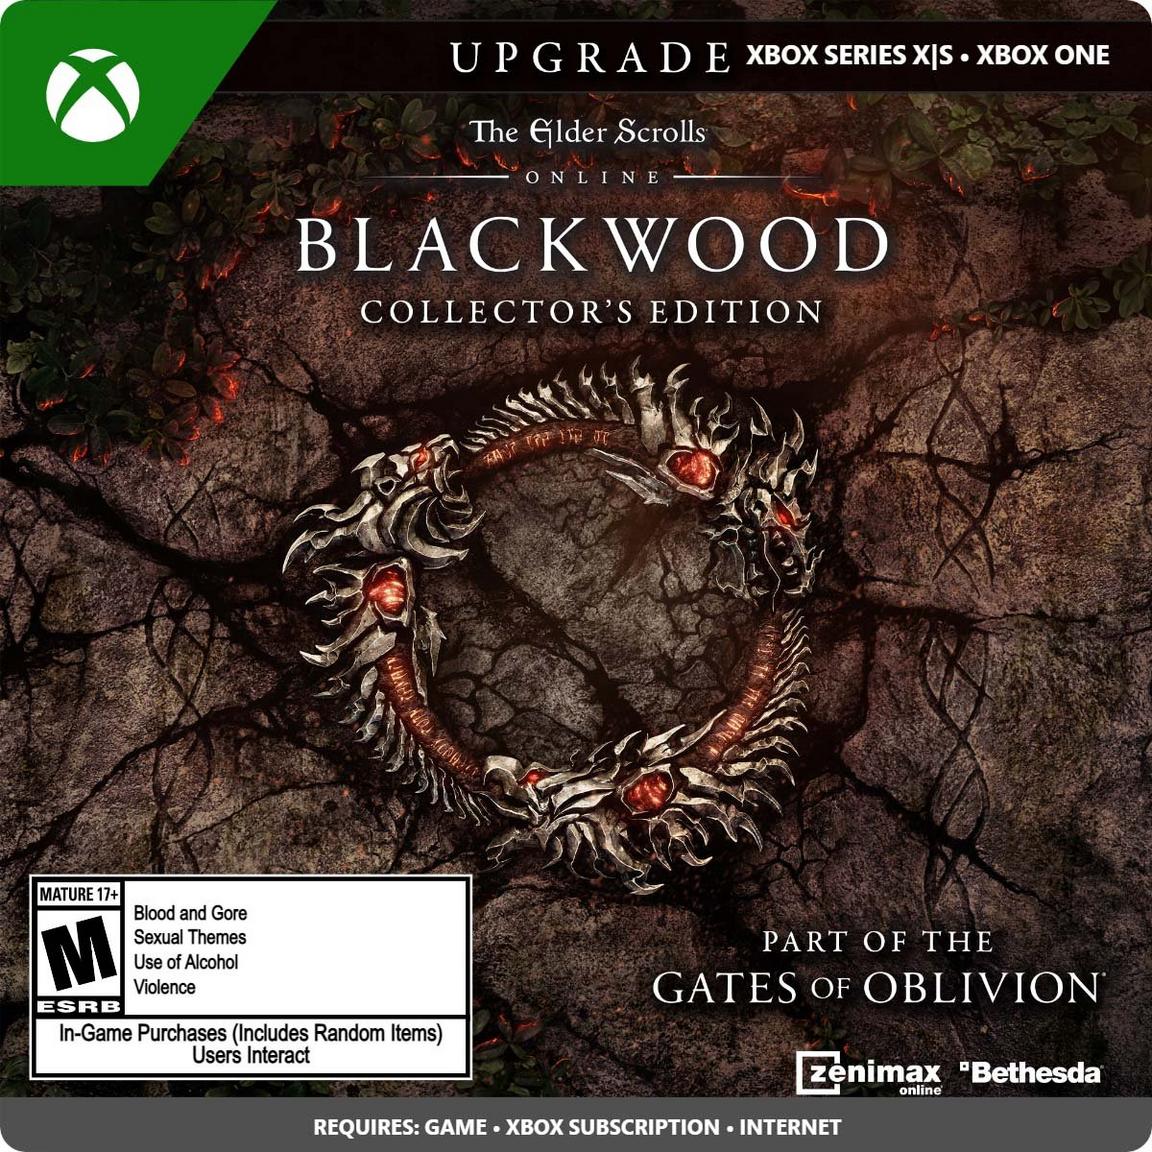 The Elder Scrolls Online Collection: Blackwood Upgrade Collector's Edition DLC for Xbox One, Digital -  Bethesda Softworks, 7CN-00103